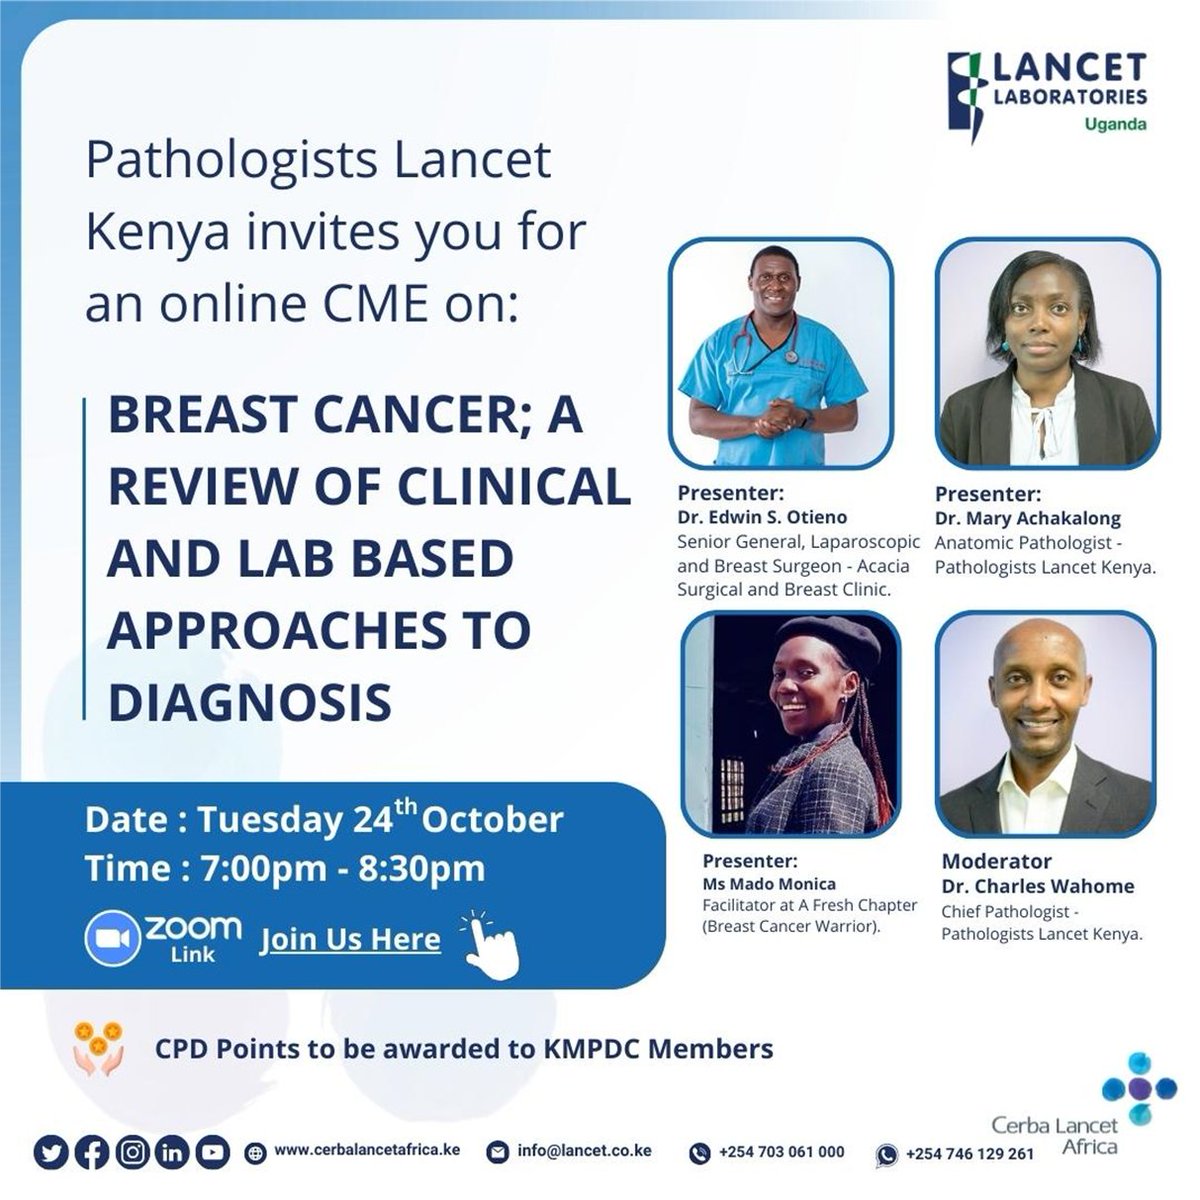 I invite you all tomorrow to join us for a CME on Breast Cancer. Questions are welcome. 
From 7:00pm to 8:30pm..EAT 
#Knowyourhealth
#visitLancetlabsug.

Hear from you all.